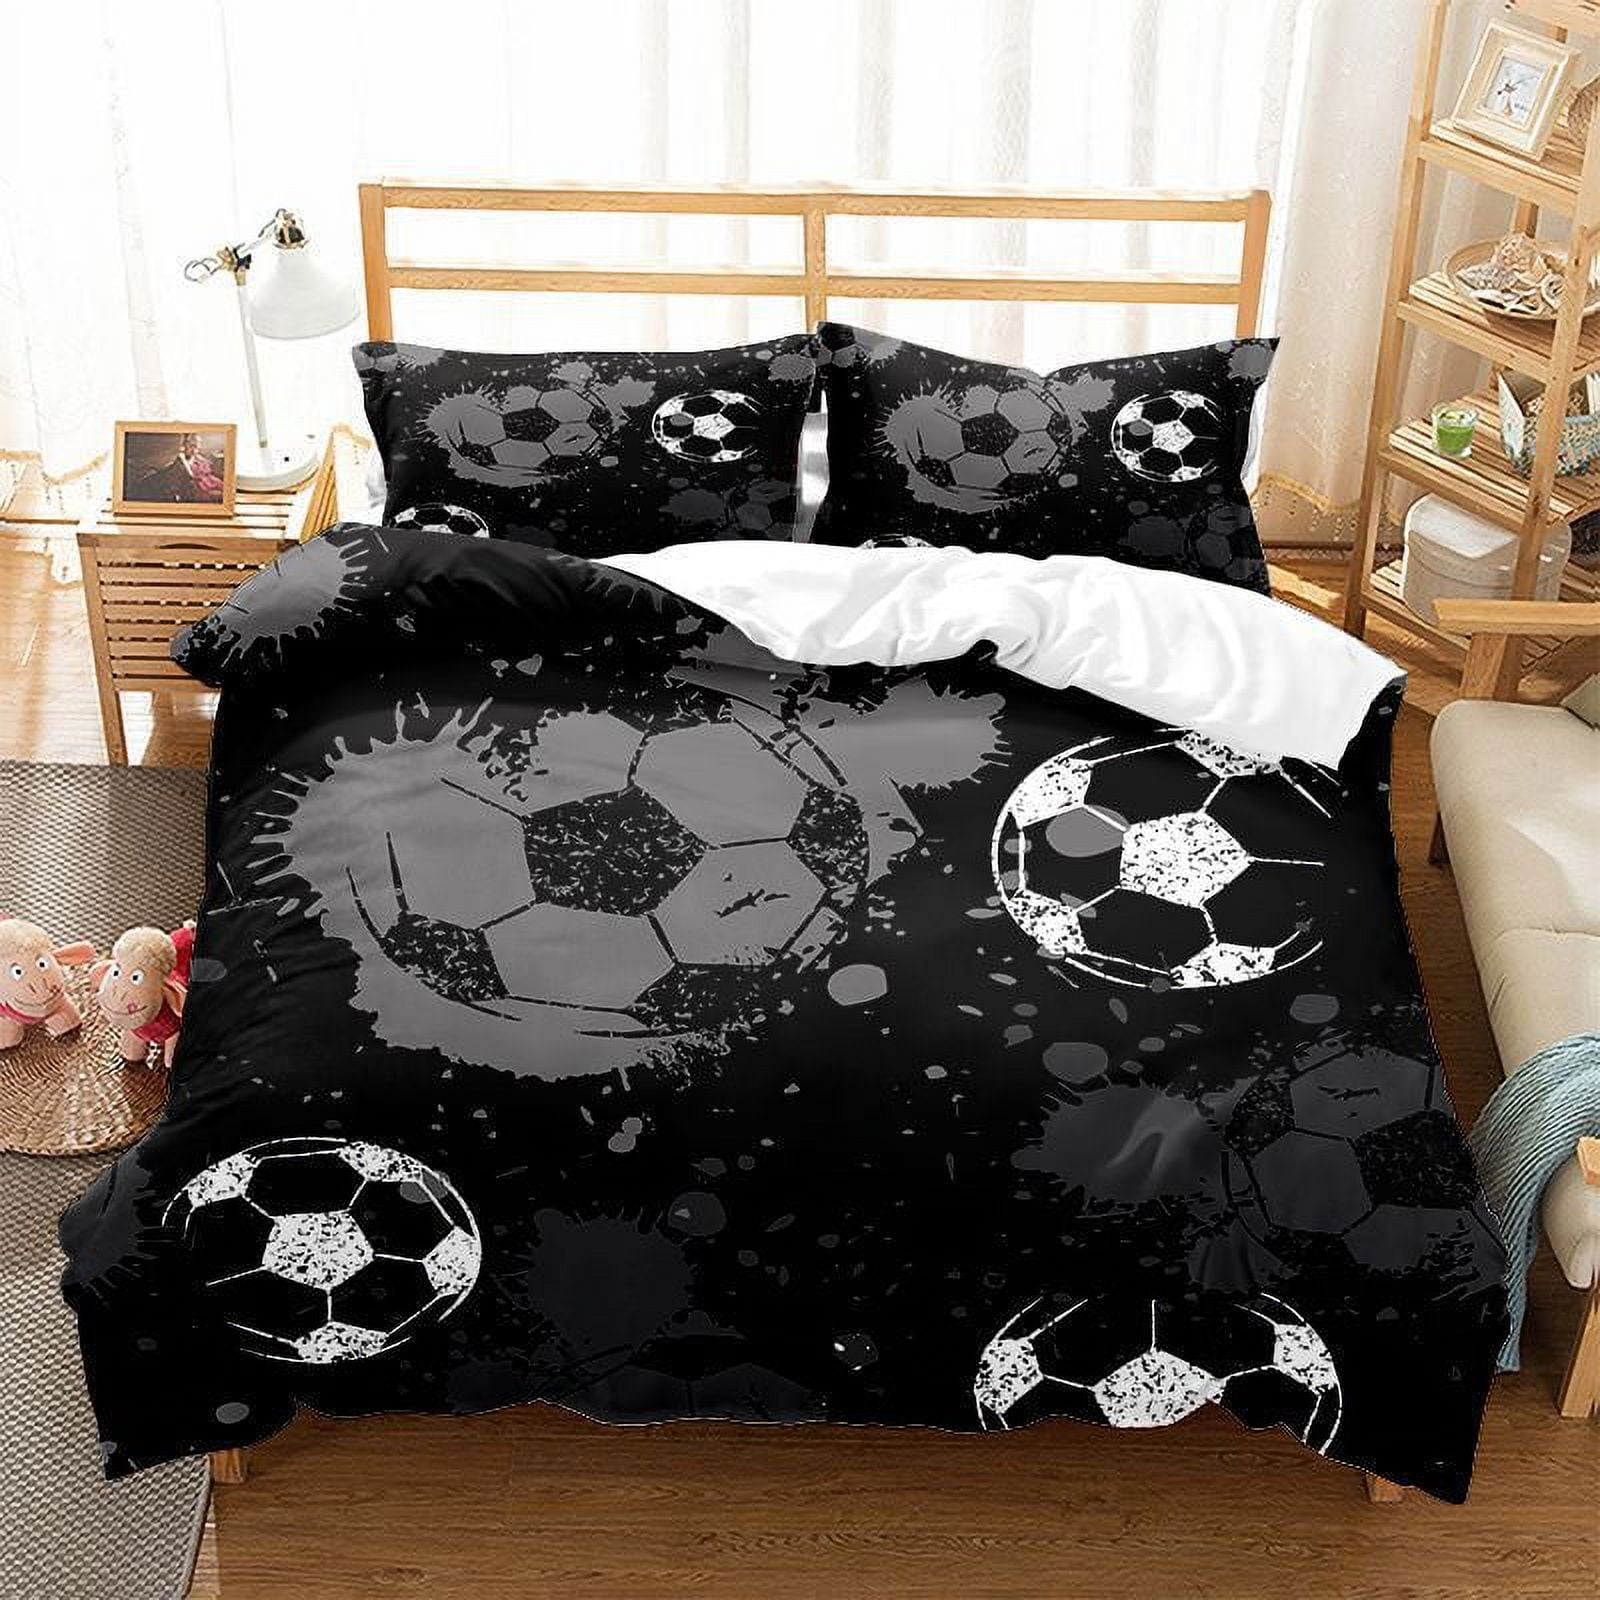 Basketball and Football Comforter Sets for Boys,3 Piece Bed in A Bag ...